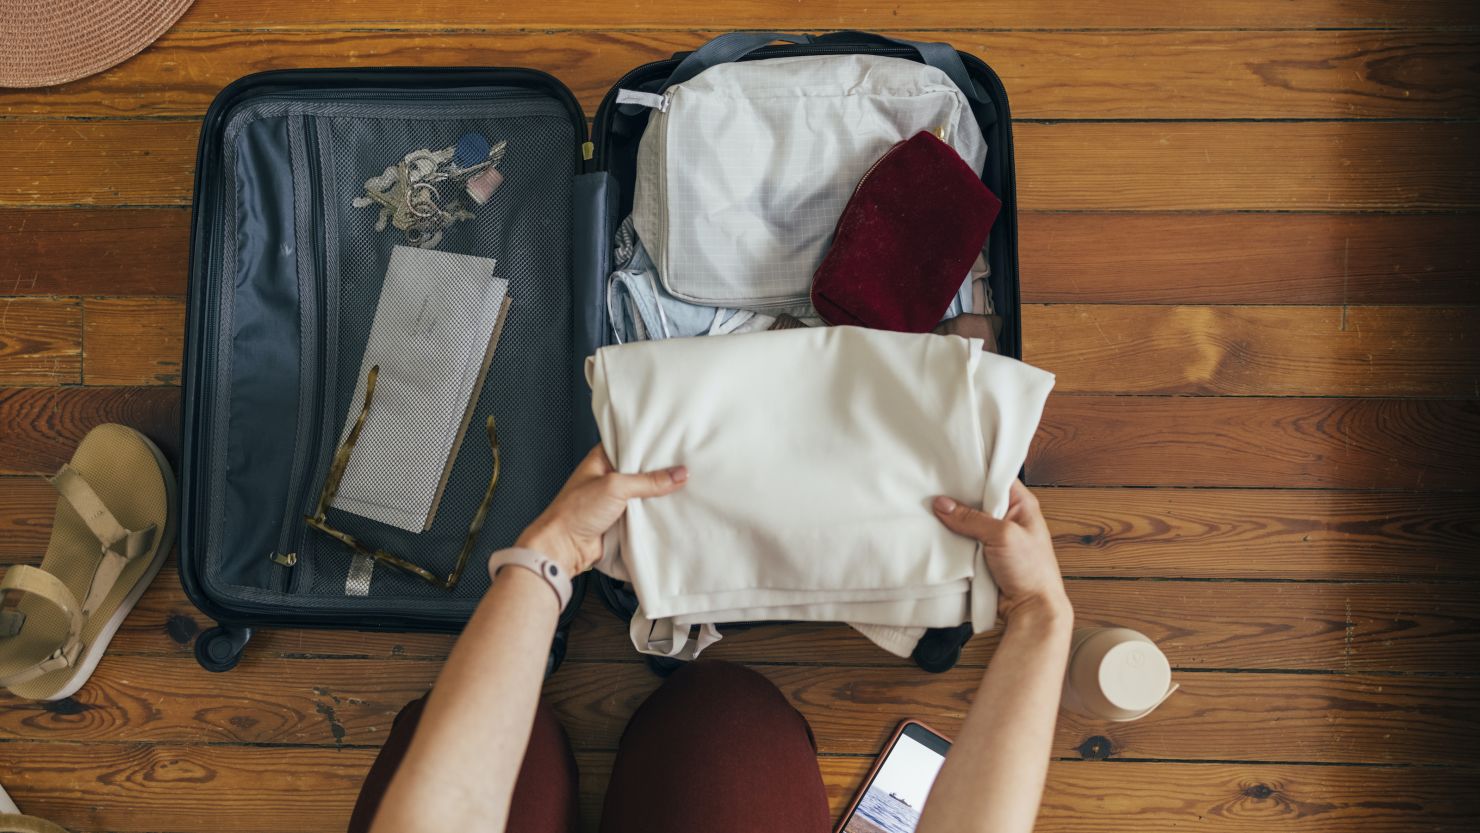 Under-$25 Travel Items To Keep You Comfortable